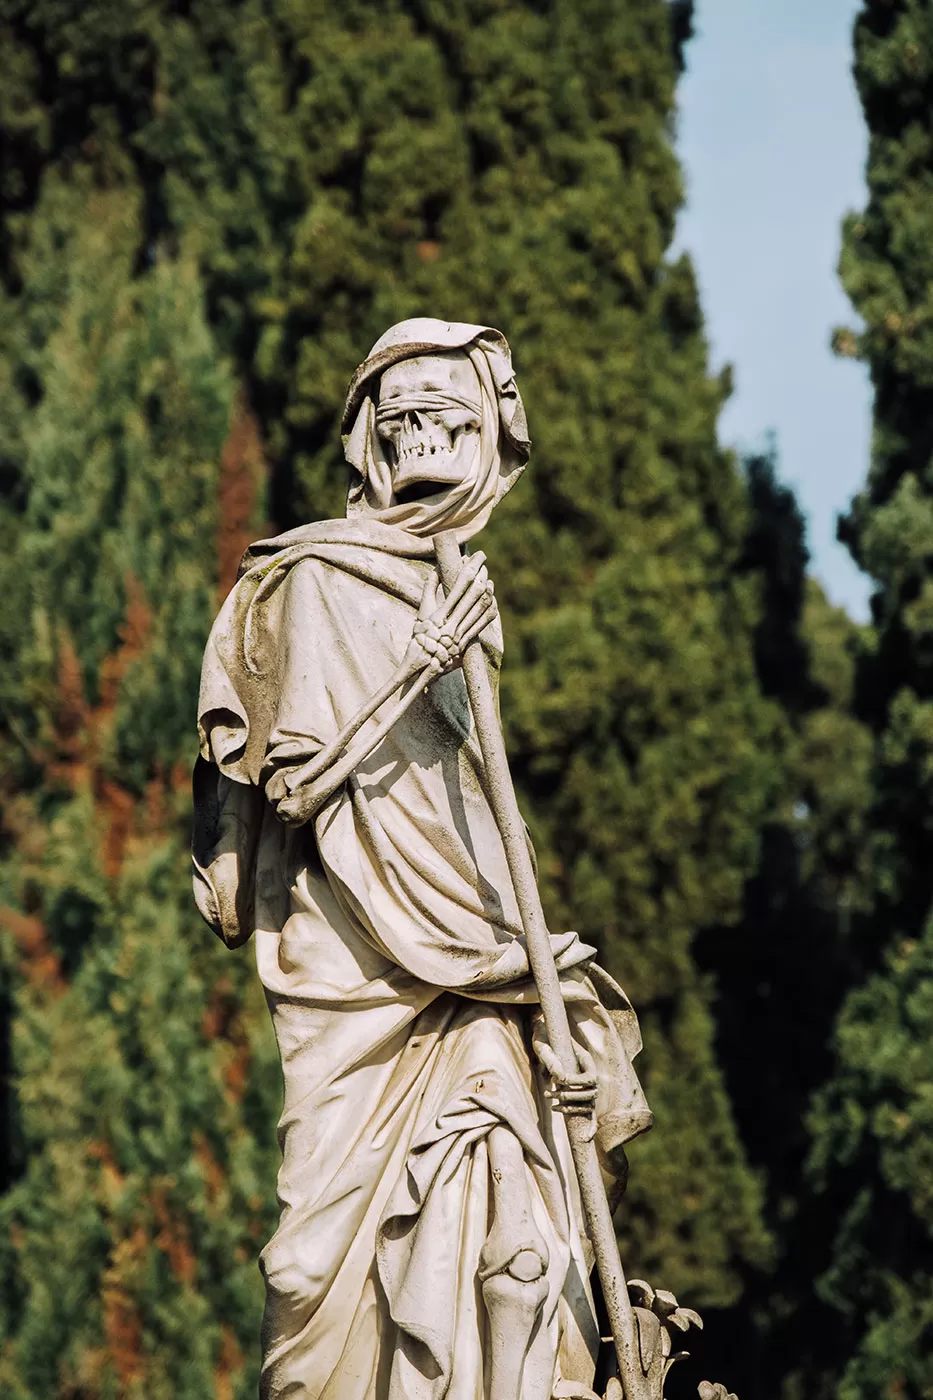 Unique Things to Do in Florence - English Cemetery - Grim reaper